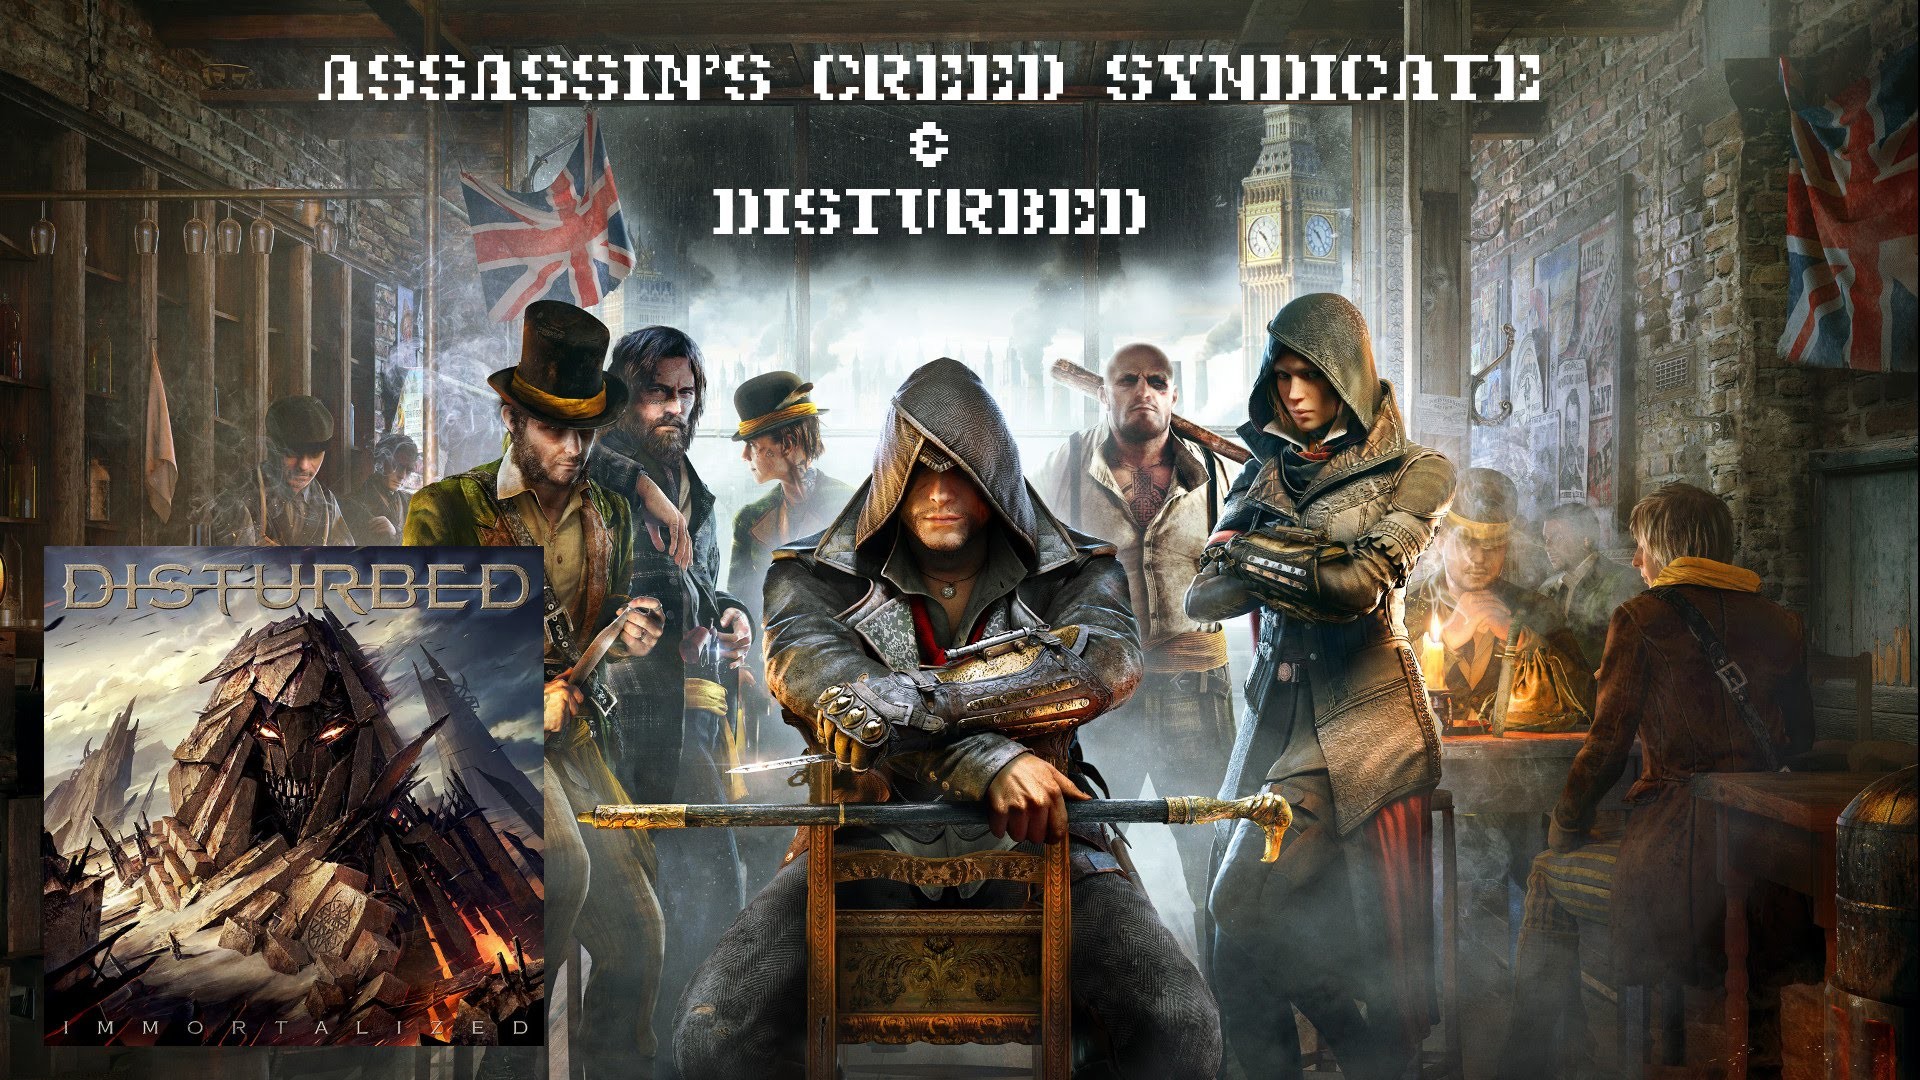 1920x1080 Assassins Creed Syndicate - Disturbed "Immortalized" Music Video